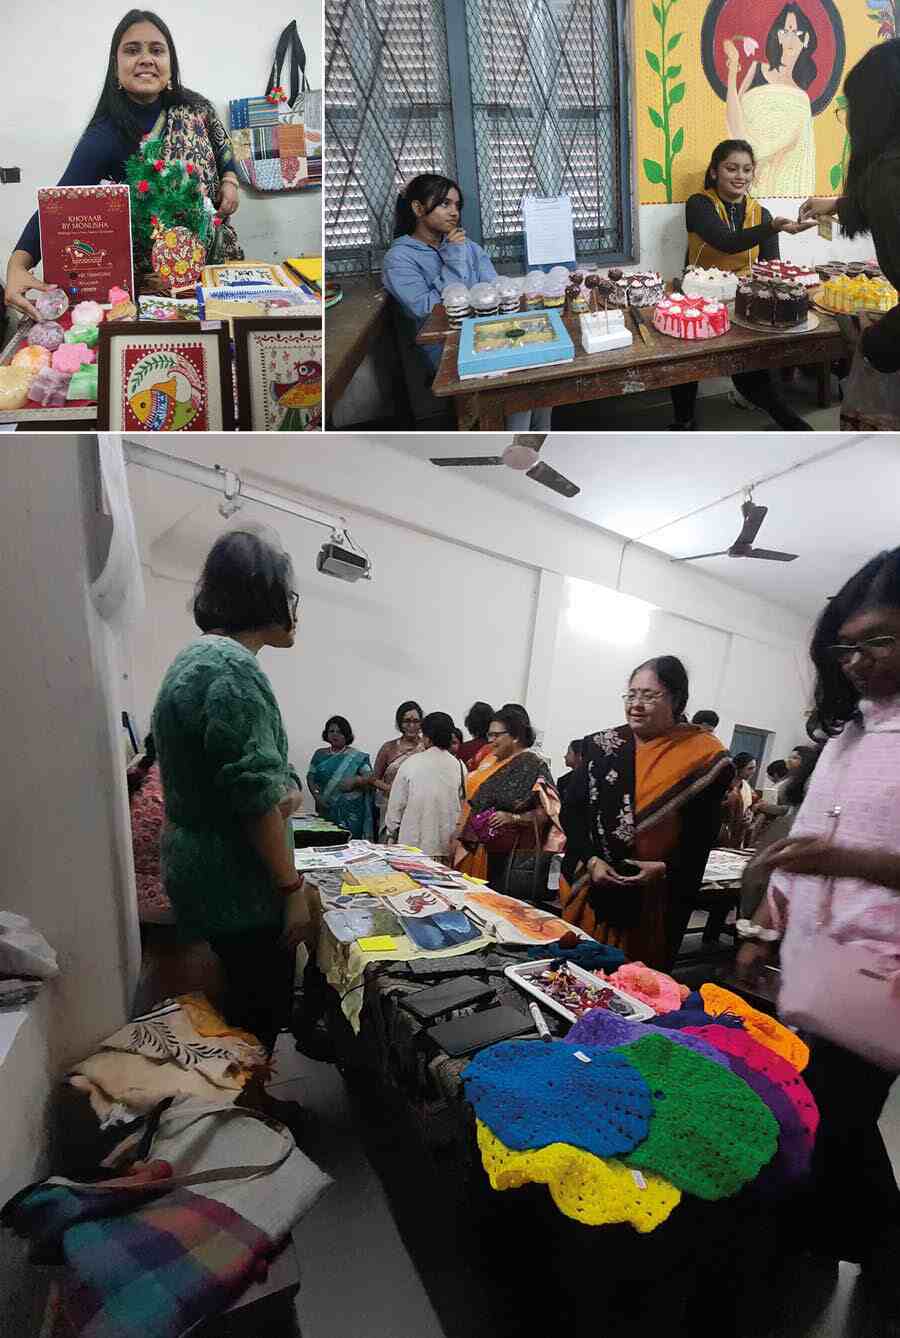 Women's Christian College Eco Club, ISPC, Unmesh Entrepreneurship Cell, Sumeli and Sucharu, organised a Christmas Carnival within the college premises. The event featured a display and sale of student-crafted handicrafts and delicious homemade food items. Principal Ajanta Paul inaugurated the event followed by a cultural programme in the college auditorium, attended by governing body members and the esteemed chief guest, Anand Peacock, pastor of Circular Road Baptist Church